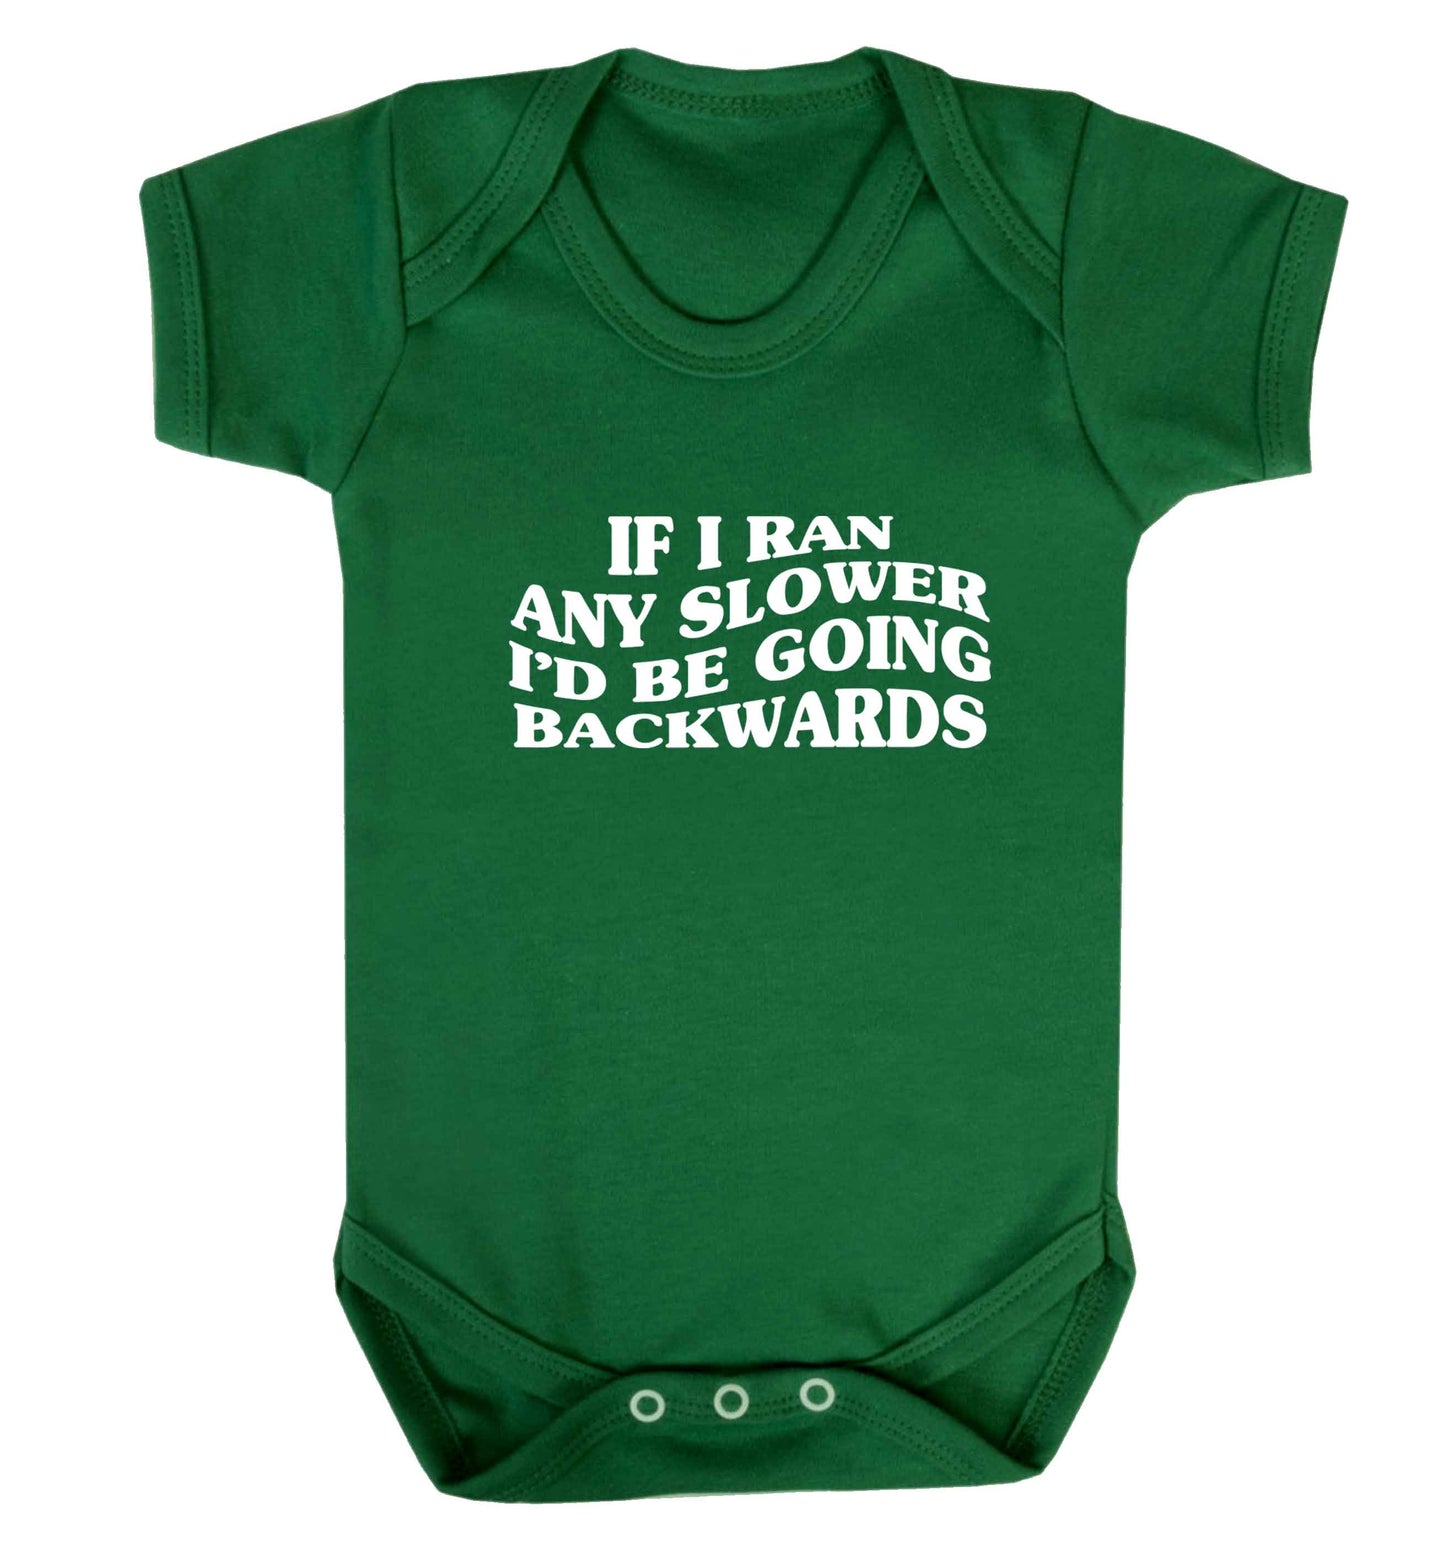 If I ran any slower I'd be going backwards baby vest green 18-24 months